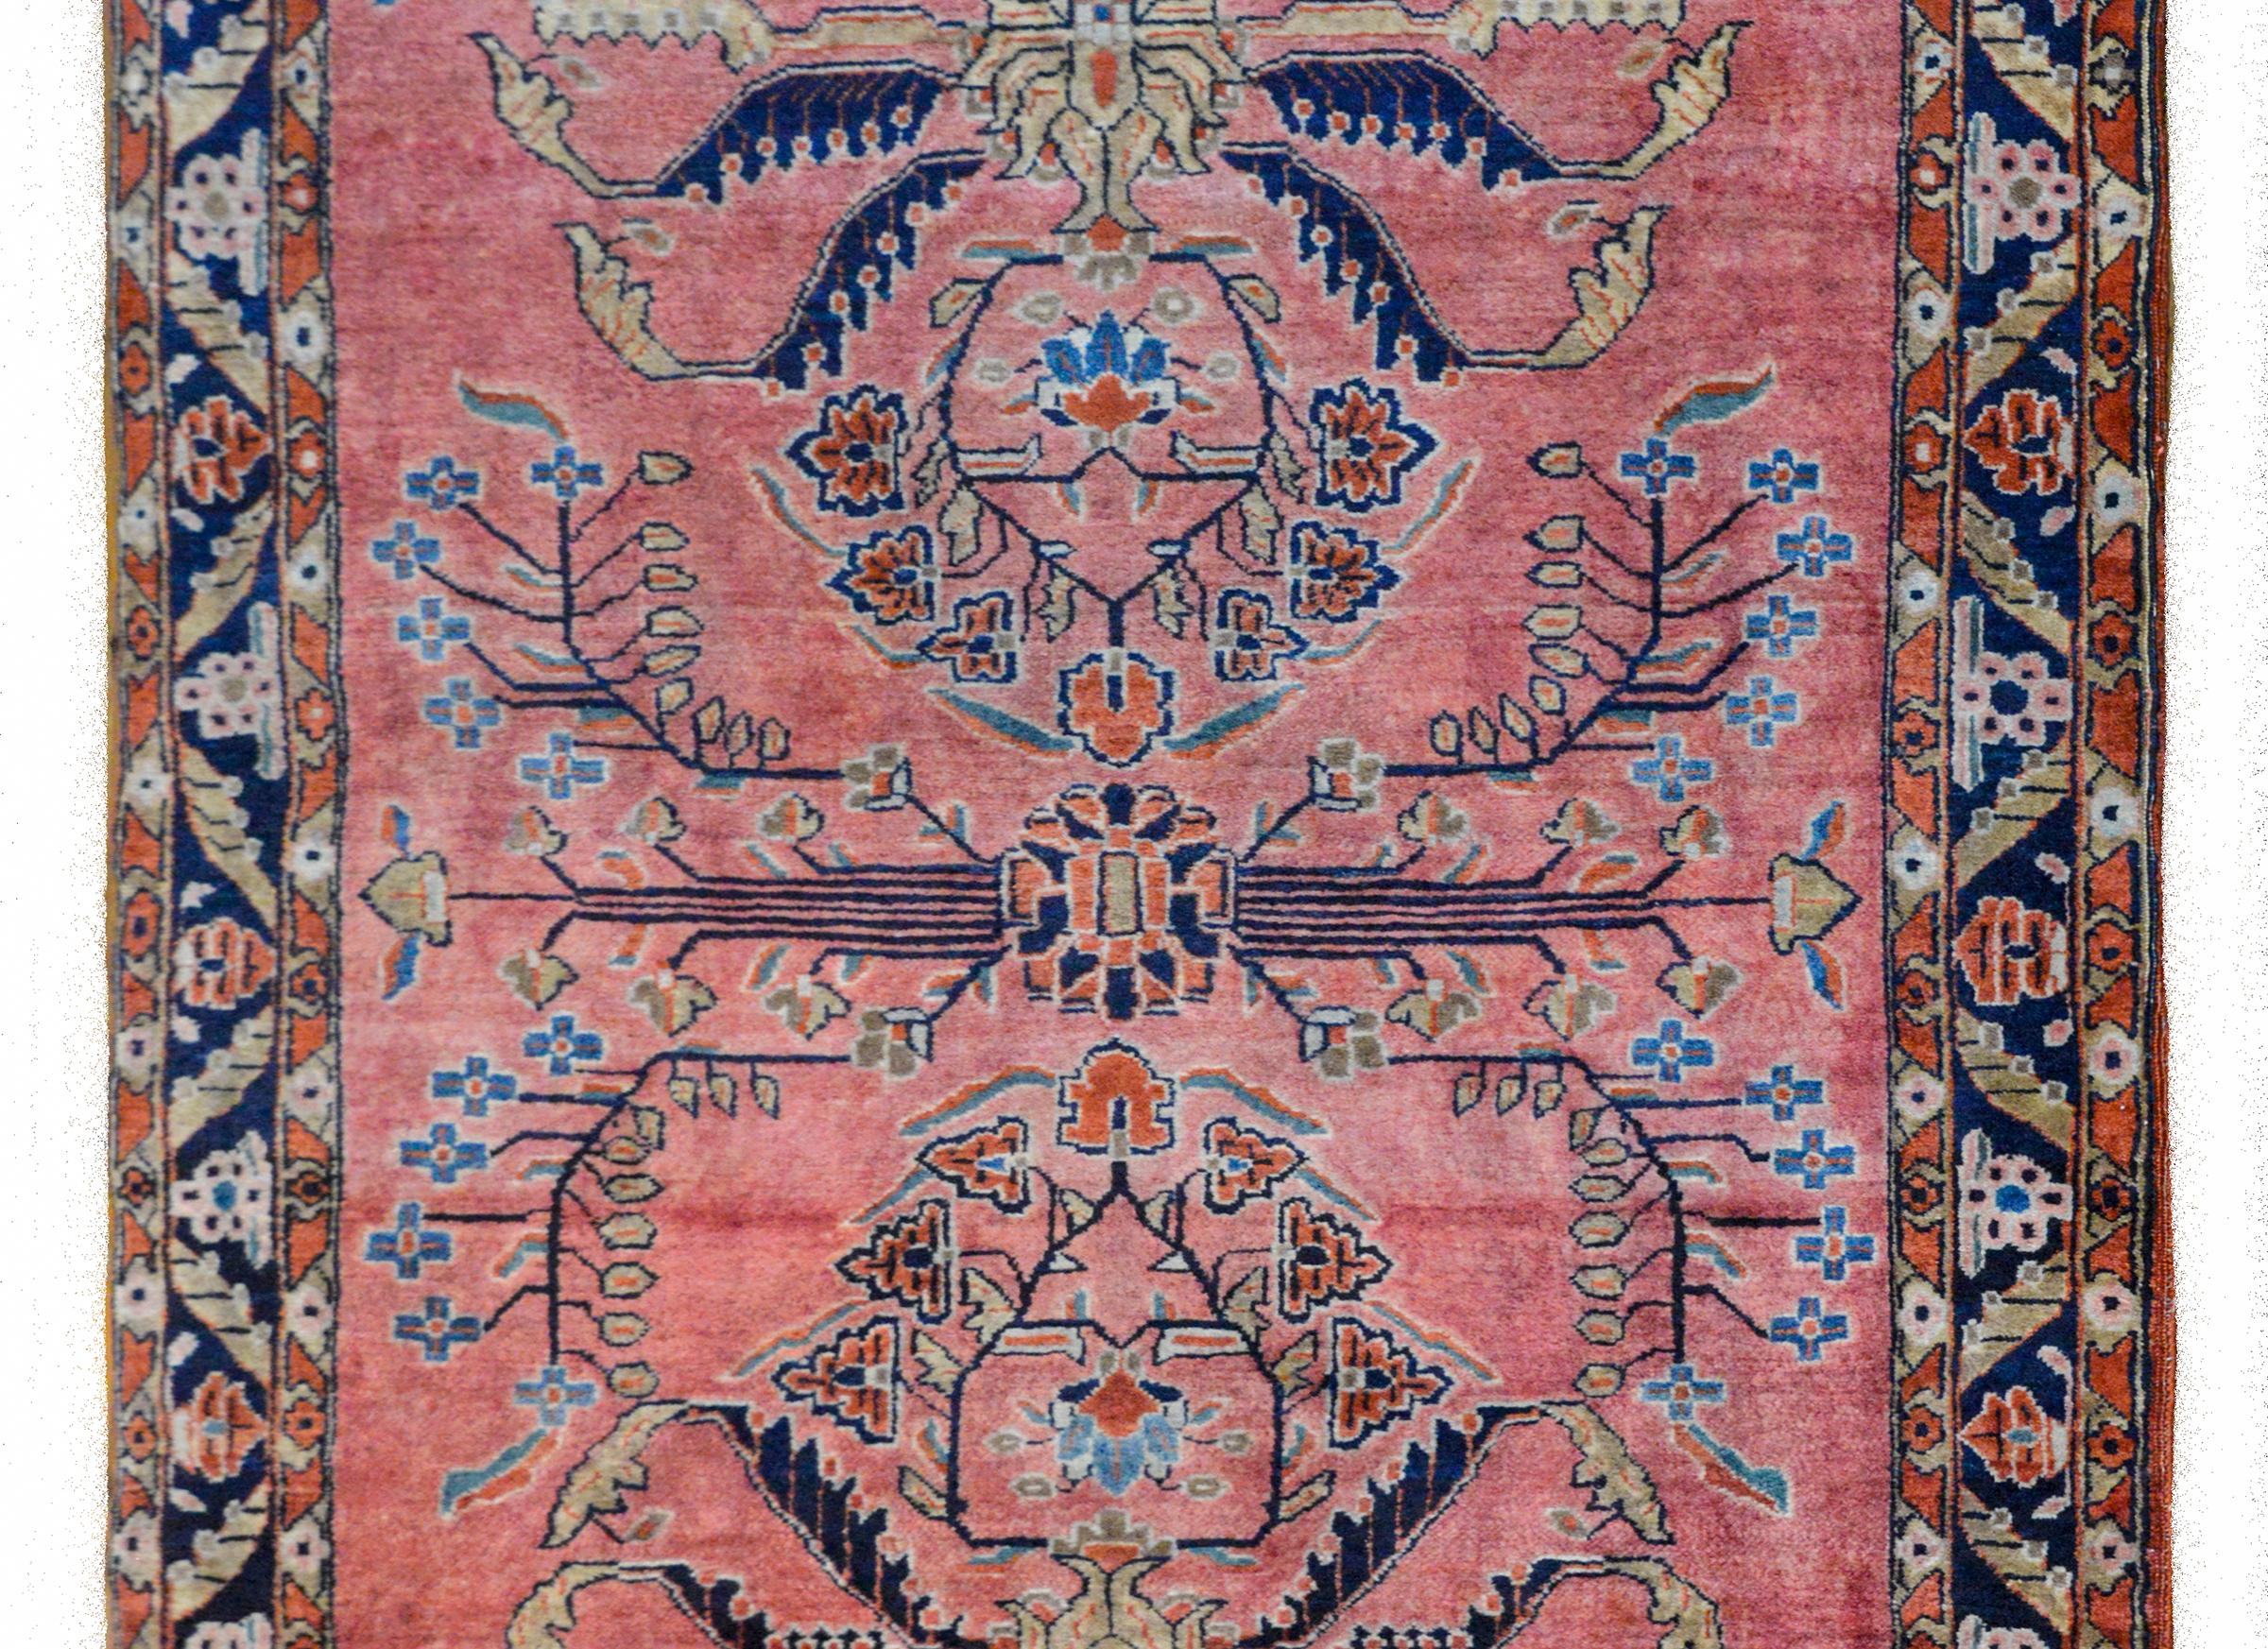 An unusual early 20th century Persian Mohajeran Sarouk rug with a striking mirrored floral pattern woven in light and dark indigo, coral, pale green, and tan wool, against a beautiful salmon colored background. The border is wonderful with a central